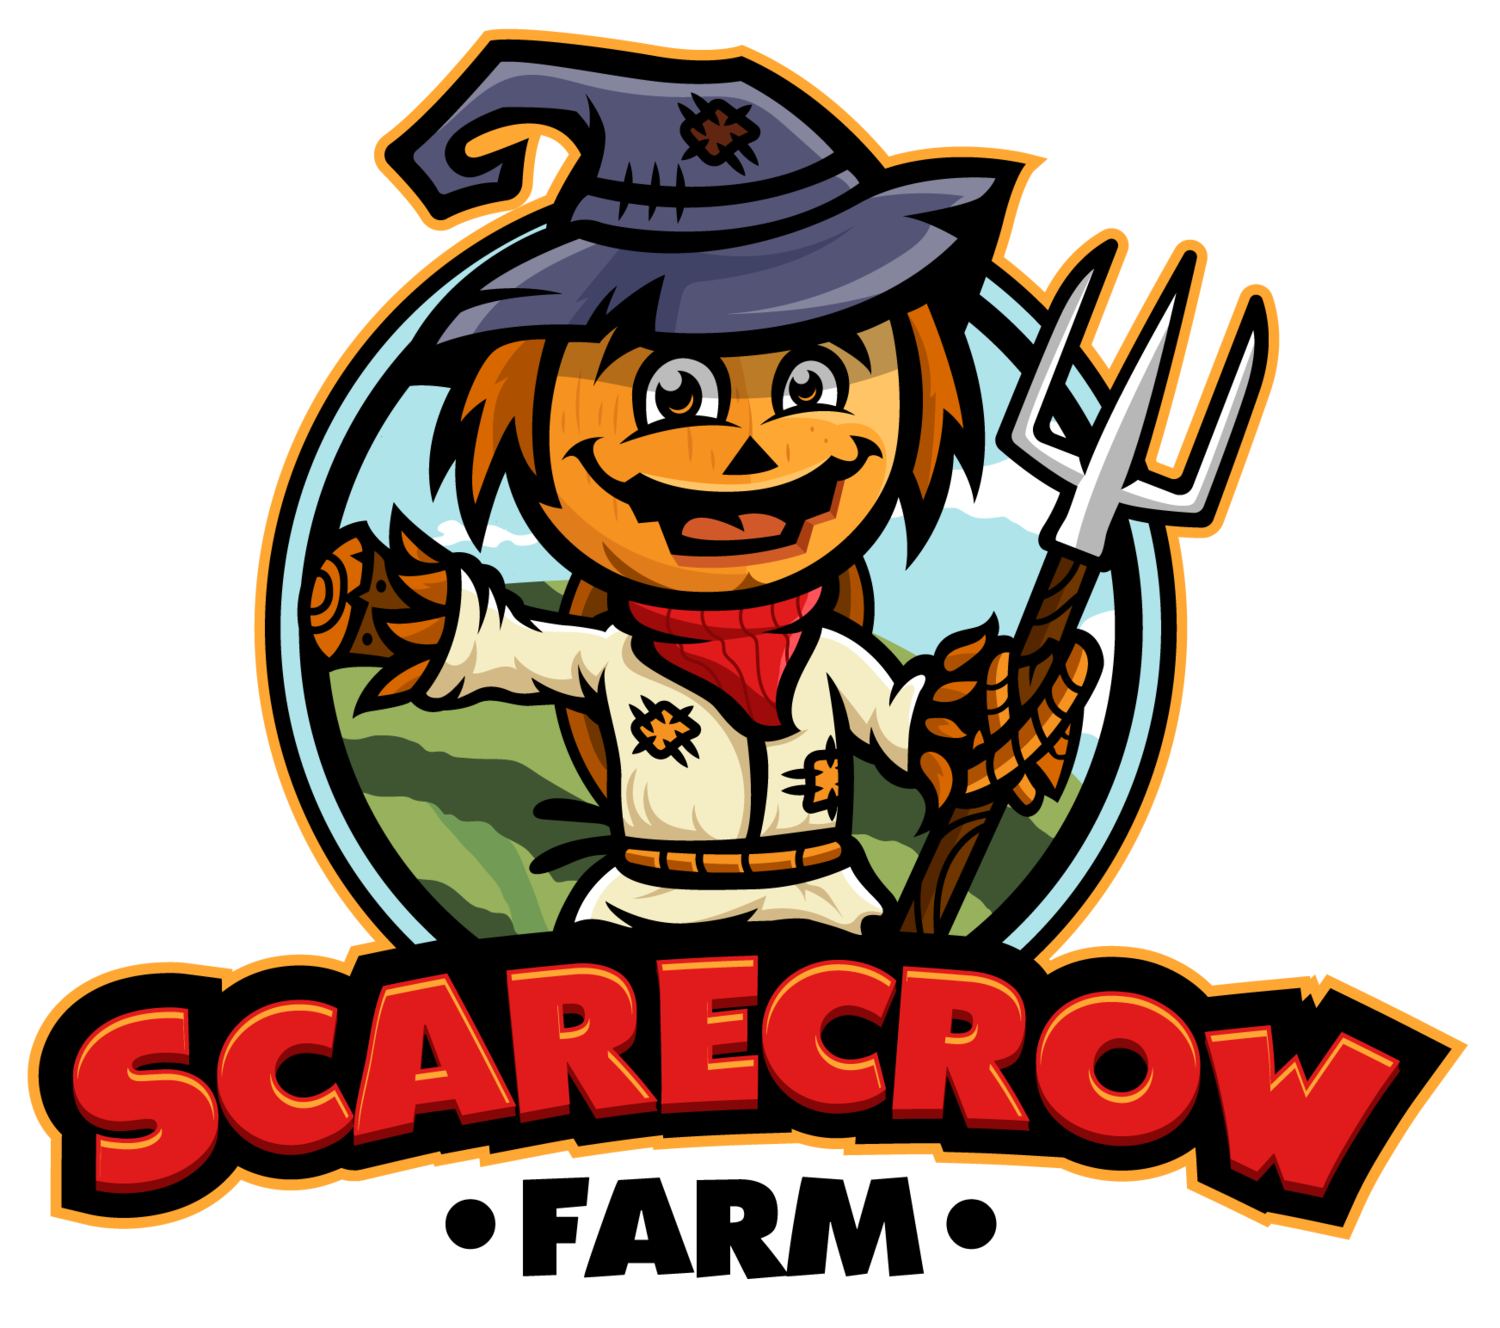 Dating scarecrow would include